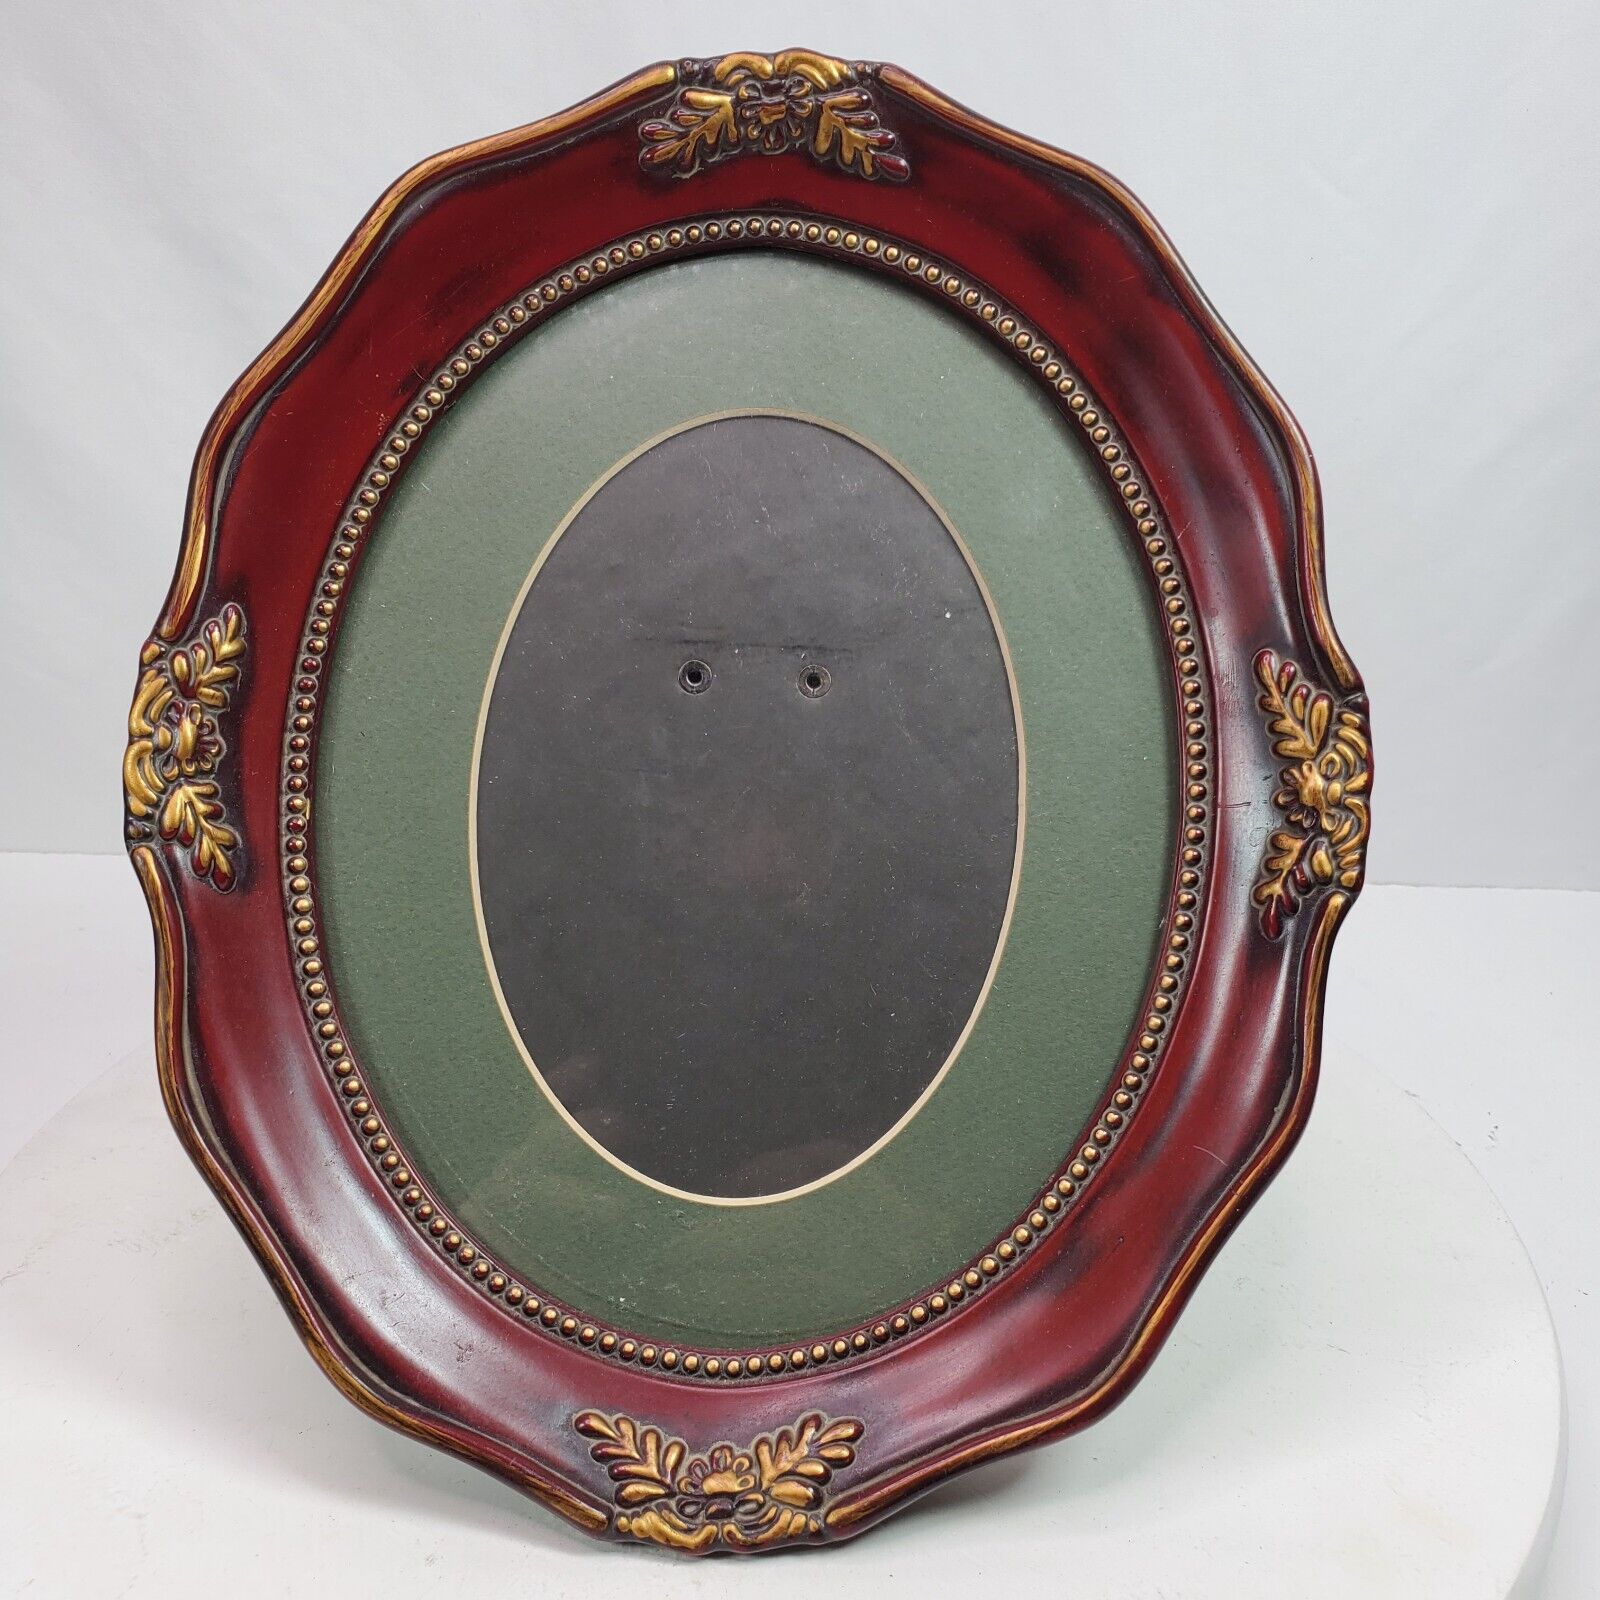 Vintage Victorian Style Oval Picture Frame Red Gold 12x10 Inch w/ Kick Stand